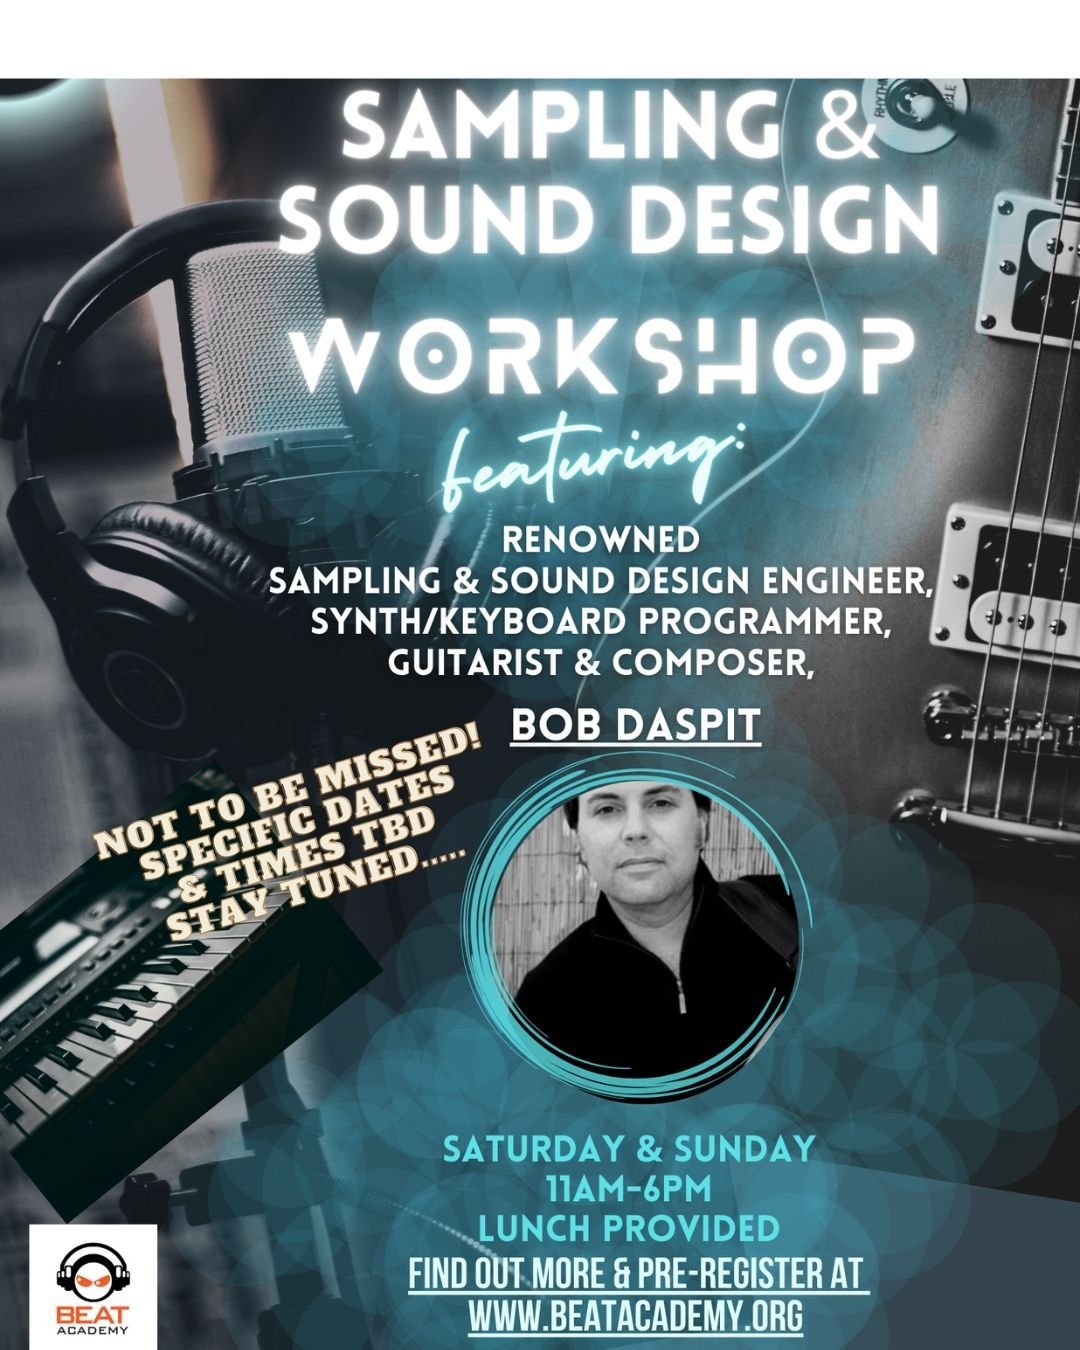 Ever been curious about sampling &amp; sound design??? Get on the list at www.beatacademy.org for this SAMPLING &amp; SOUND DESIGN WORKSHOP in Los Angeles - coming this summer 2024 with Bob Daspit! Link in bio! #beatacademy #bobdaspit #sounddesign #s